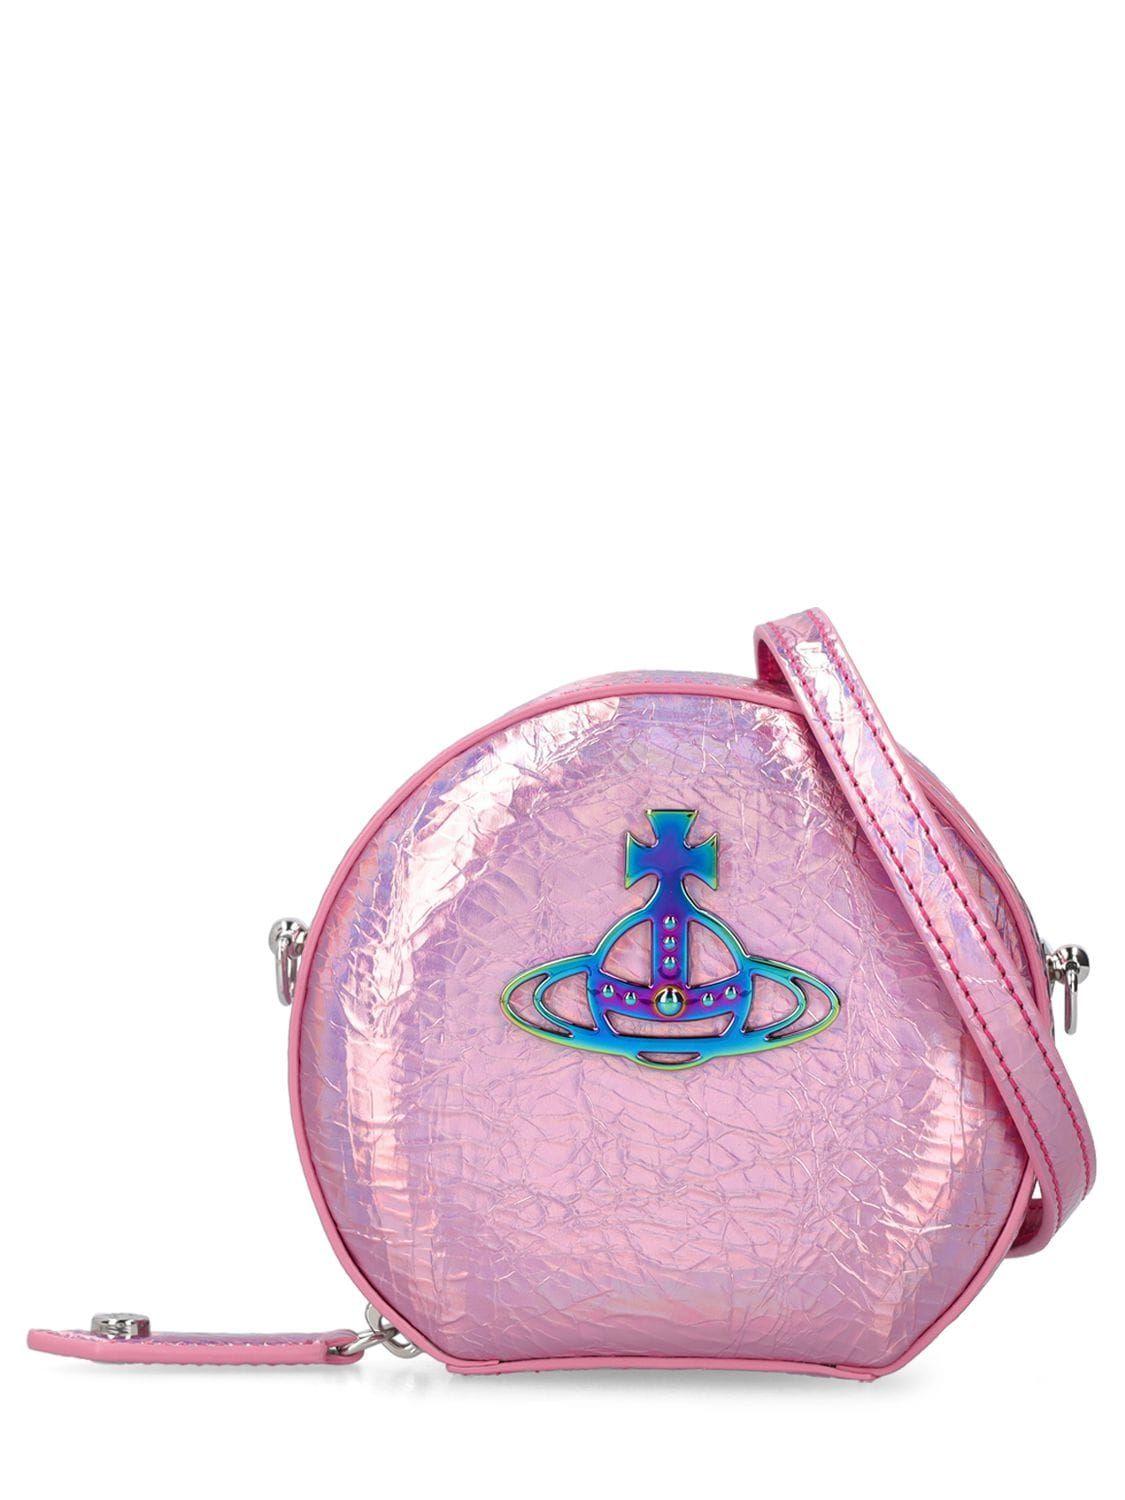 Vivienne Westwood Mini Round Iridescent Faux Leather Bag in Pink